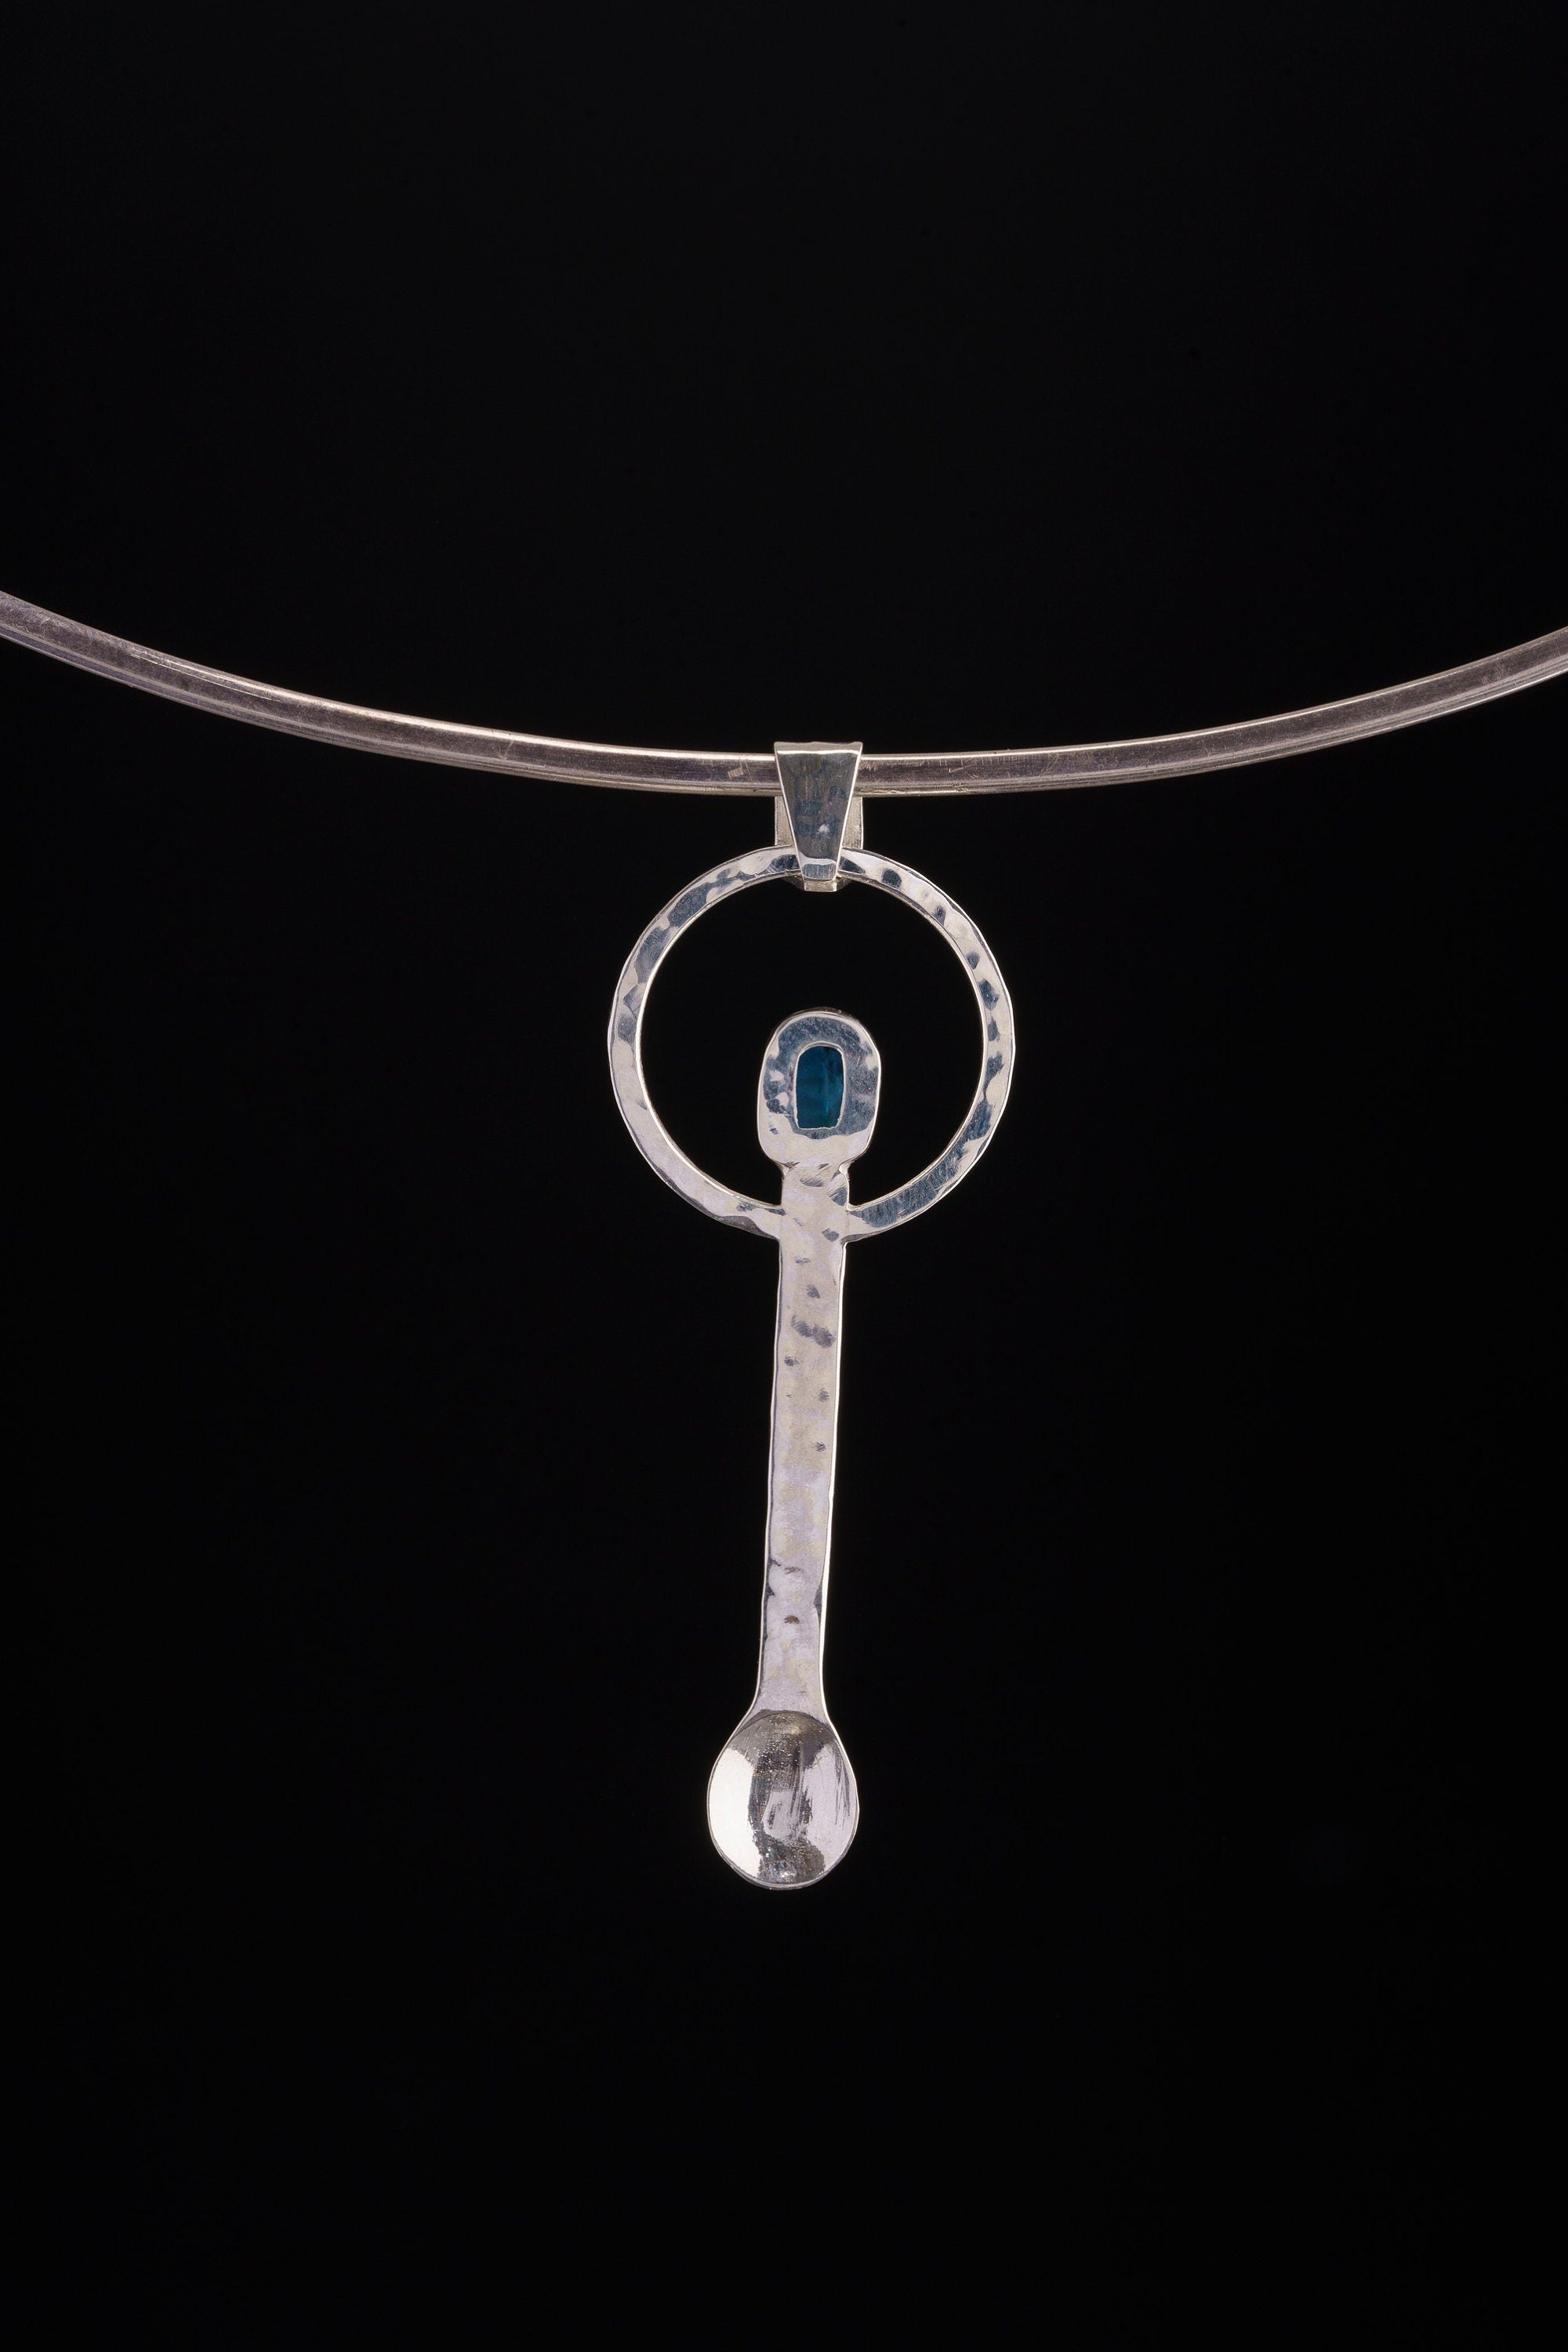 Raw Double Terminated Blue Gem Apatite - Spice / Ceremonial Spoon - 925 Cast Silver - Unique Hammer Textured - Crystal Pendant Necklace -